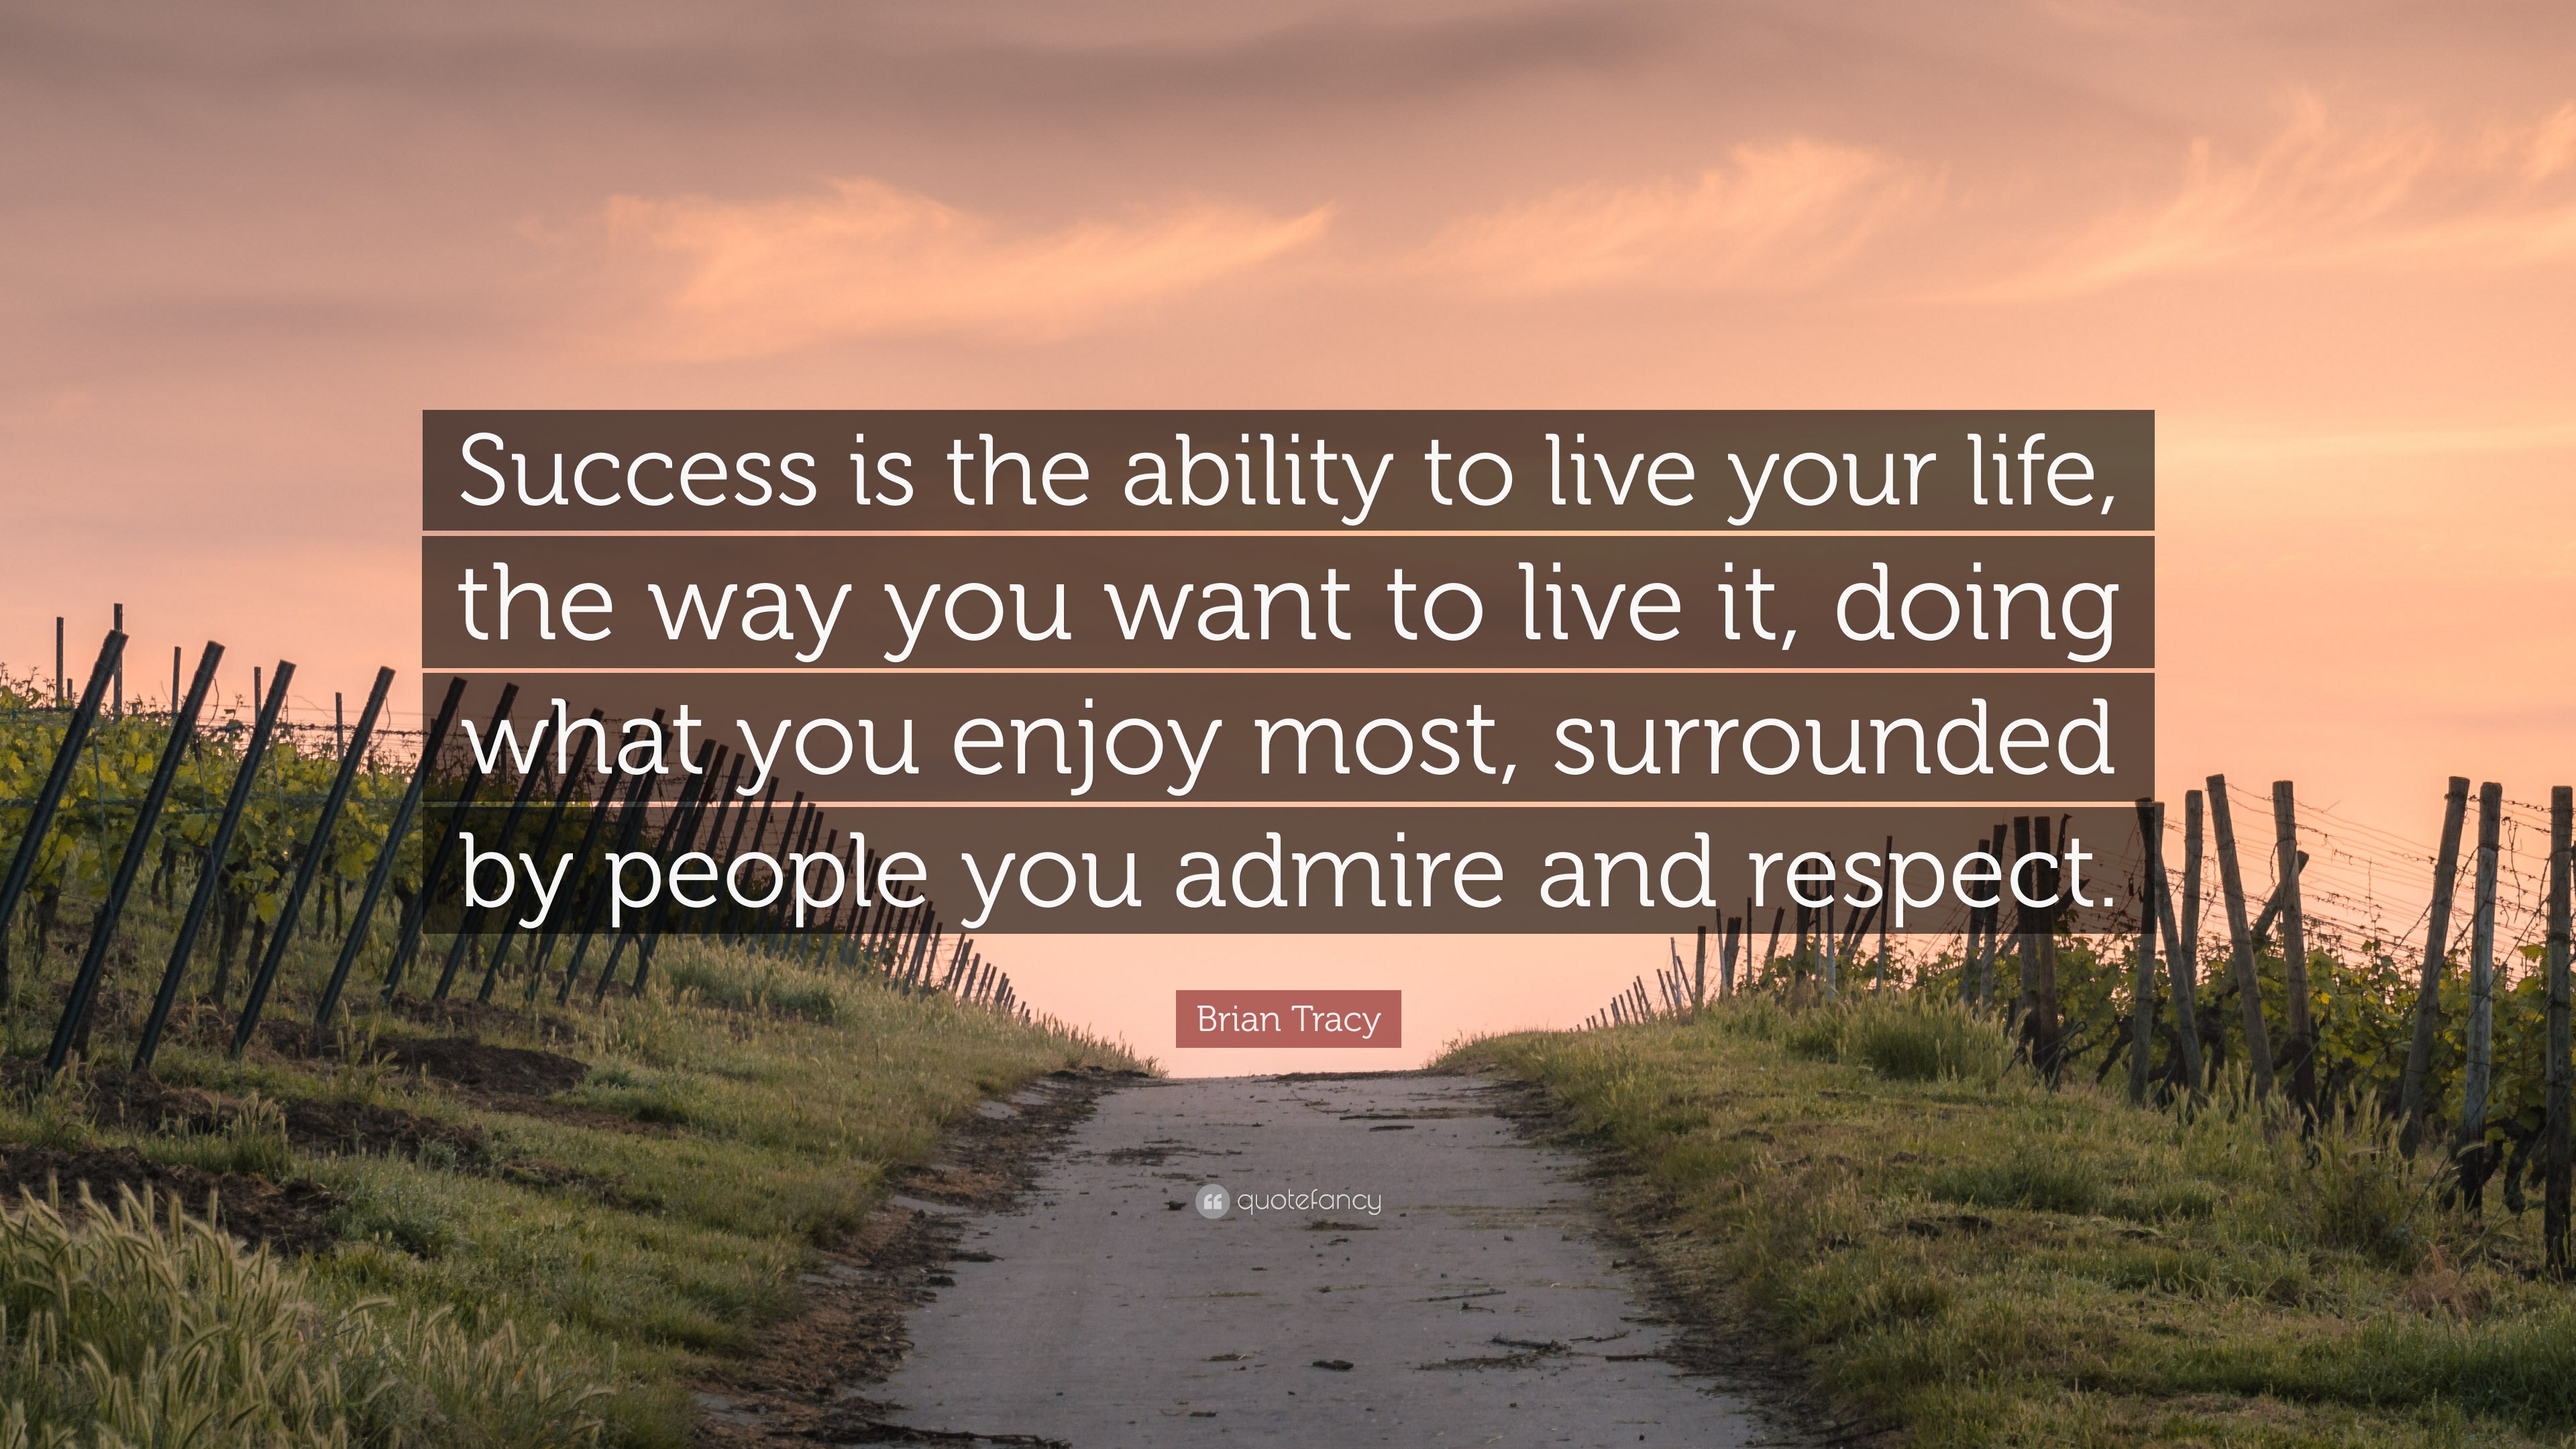 Brian Tracy Quote Success Is The Ability To Live Your Life The Way You Want To Live It Doing What You Enjoy Most Surrounded By People Y